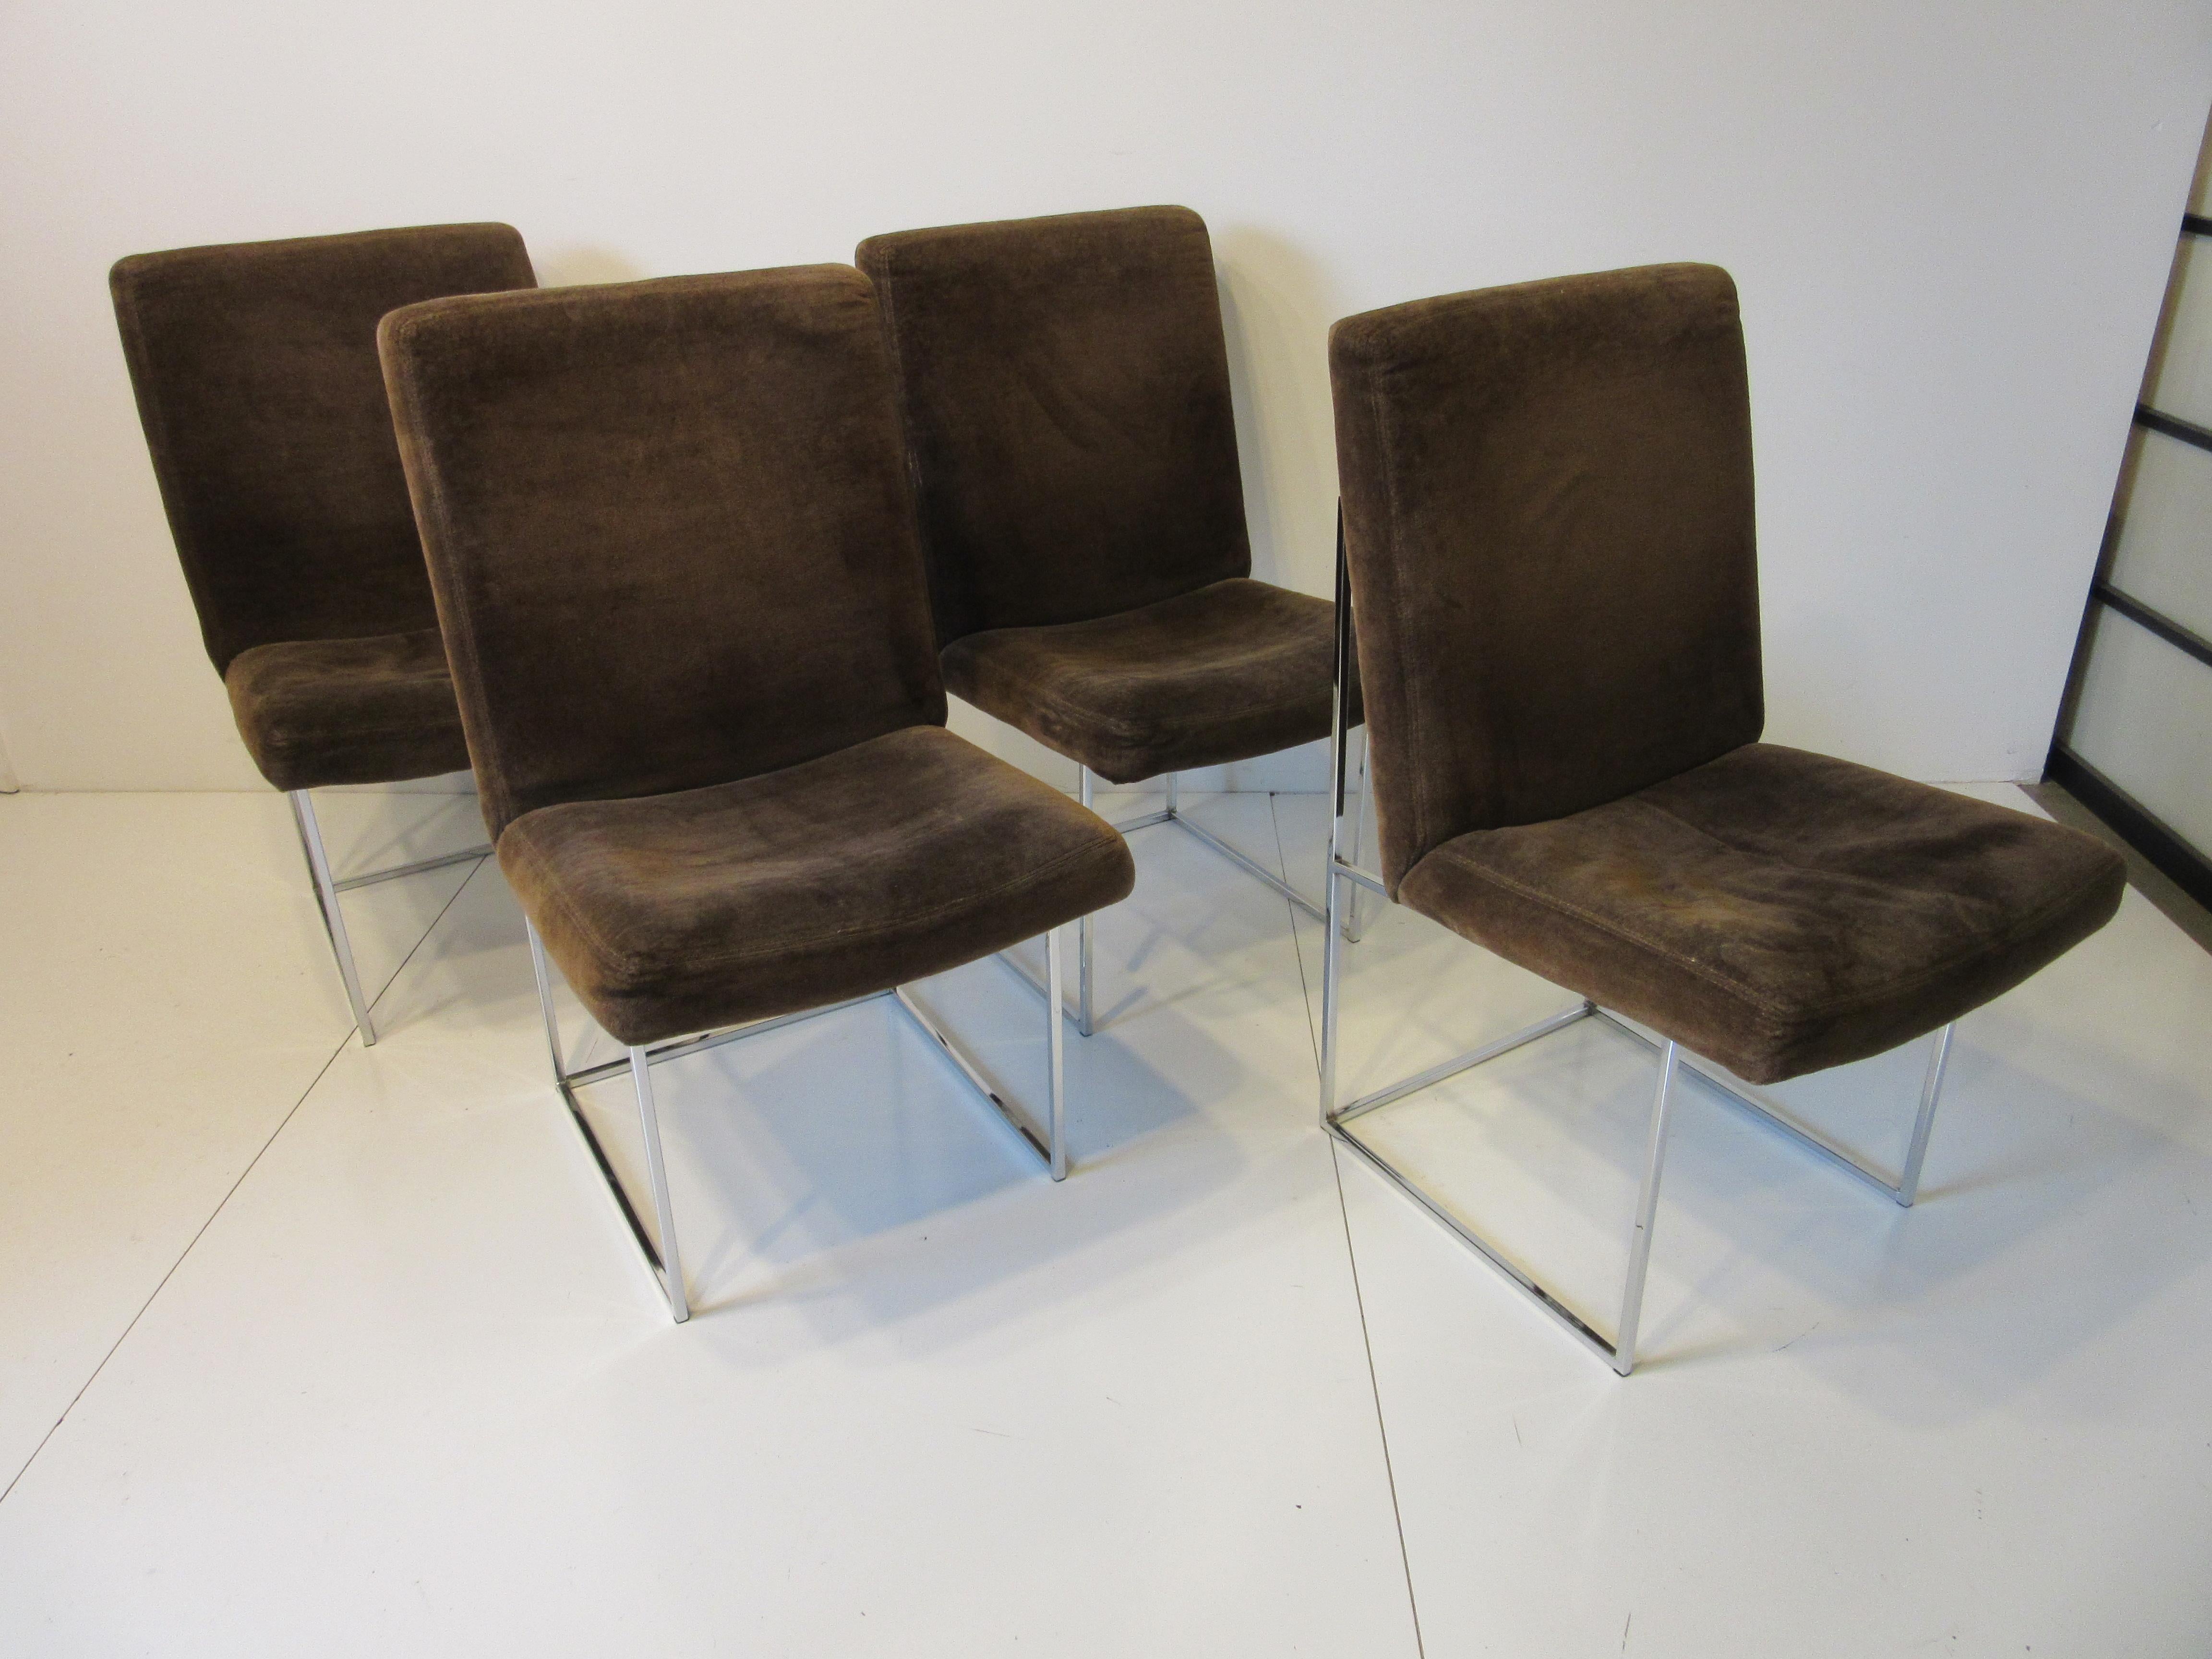 Milo Baughman Upholstered and Chrome Dining Chairs for Thayer Coggin 1